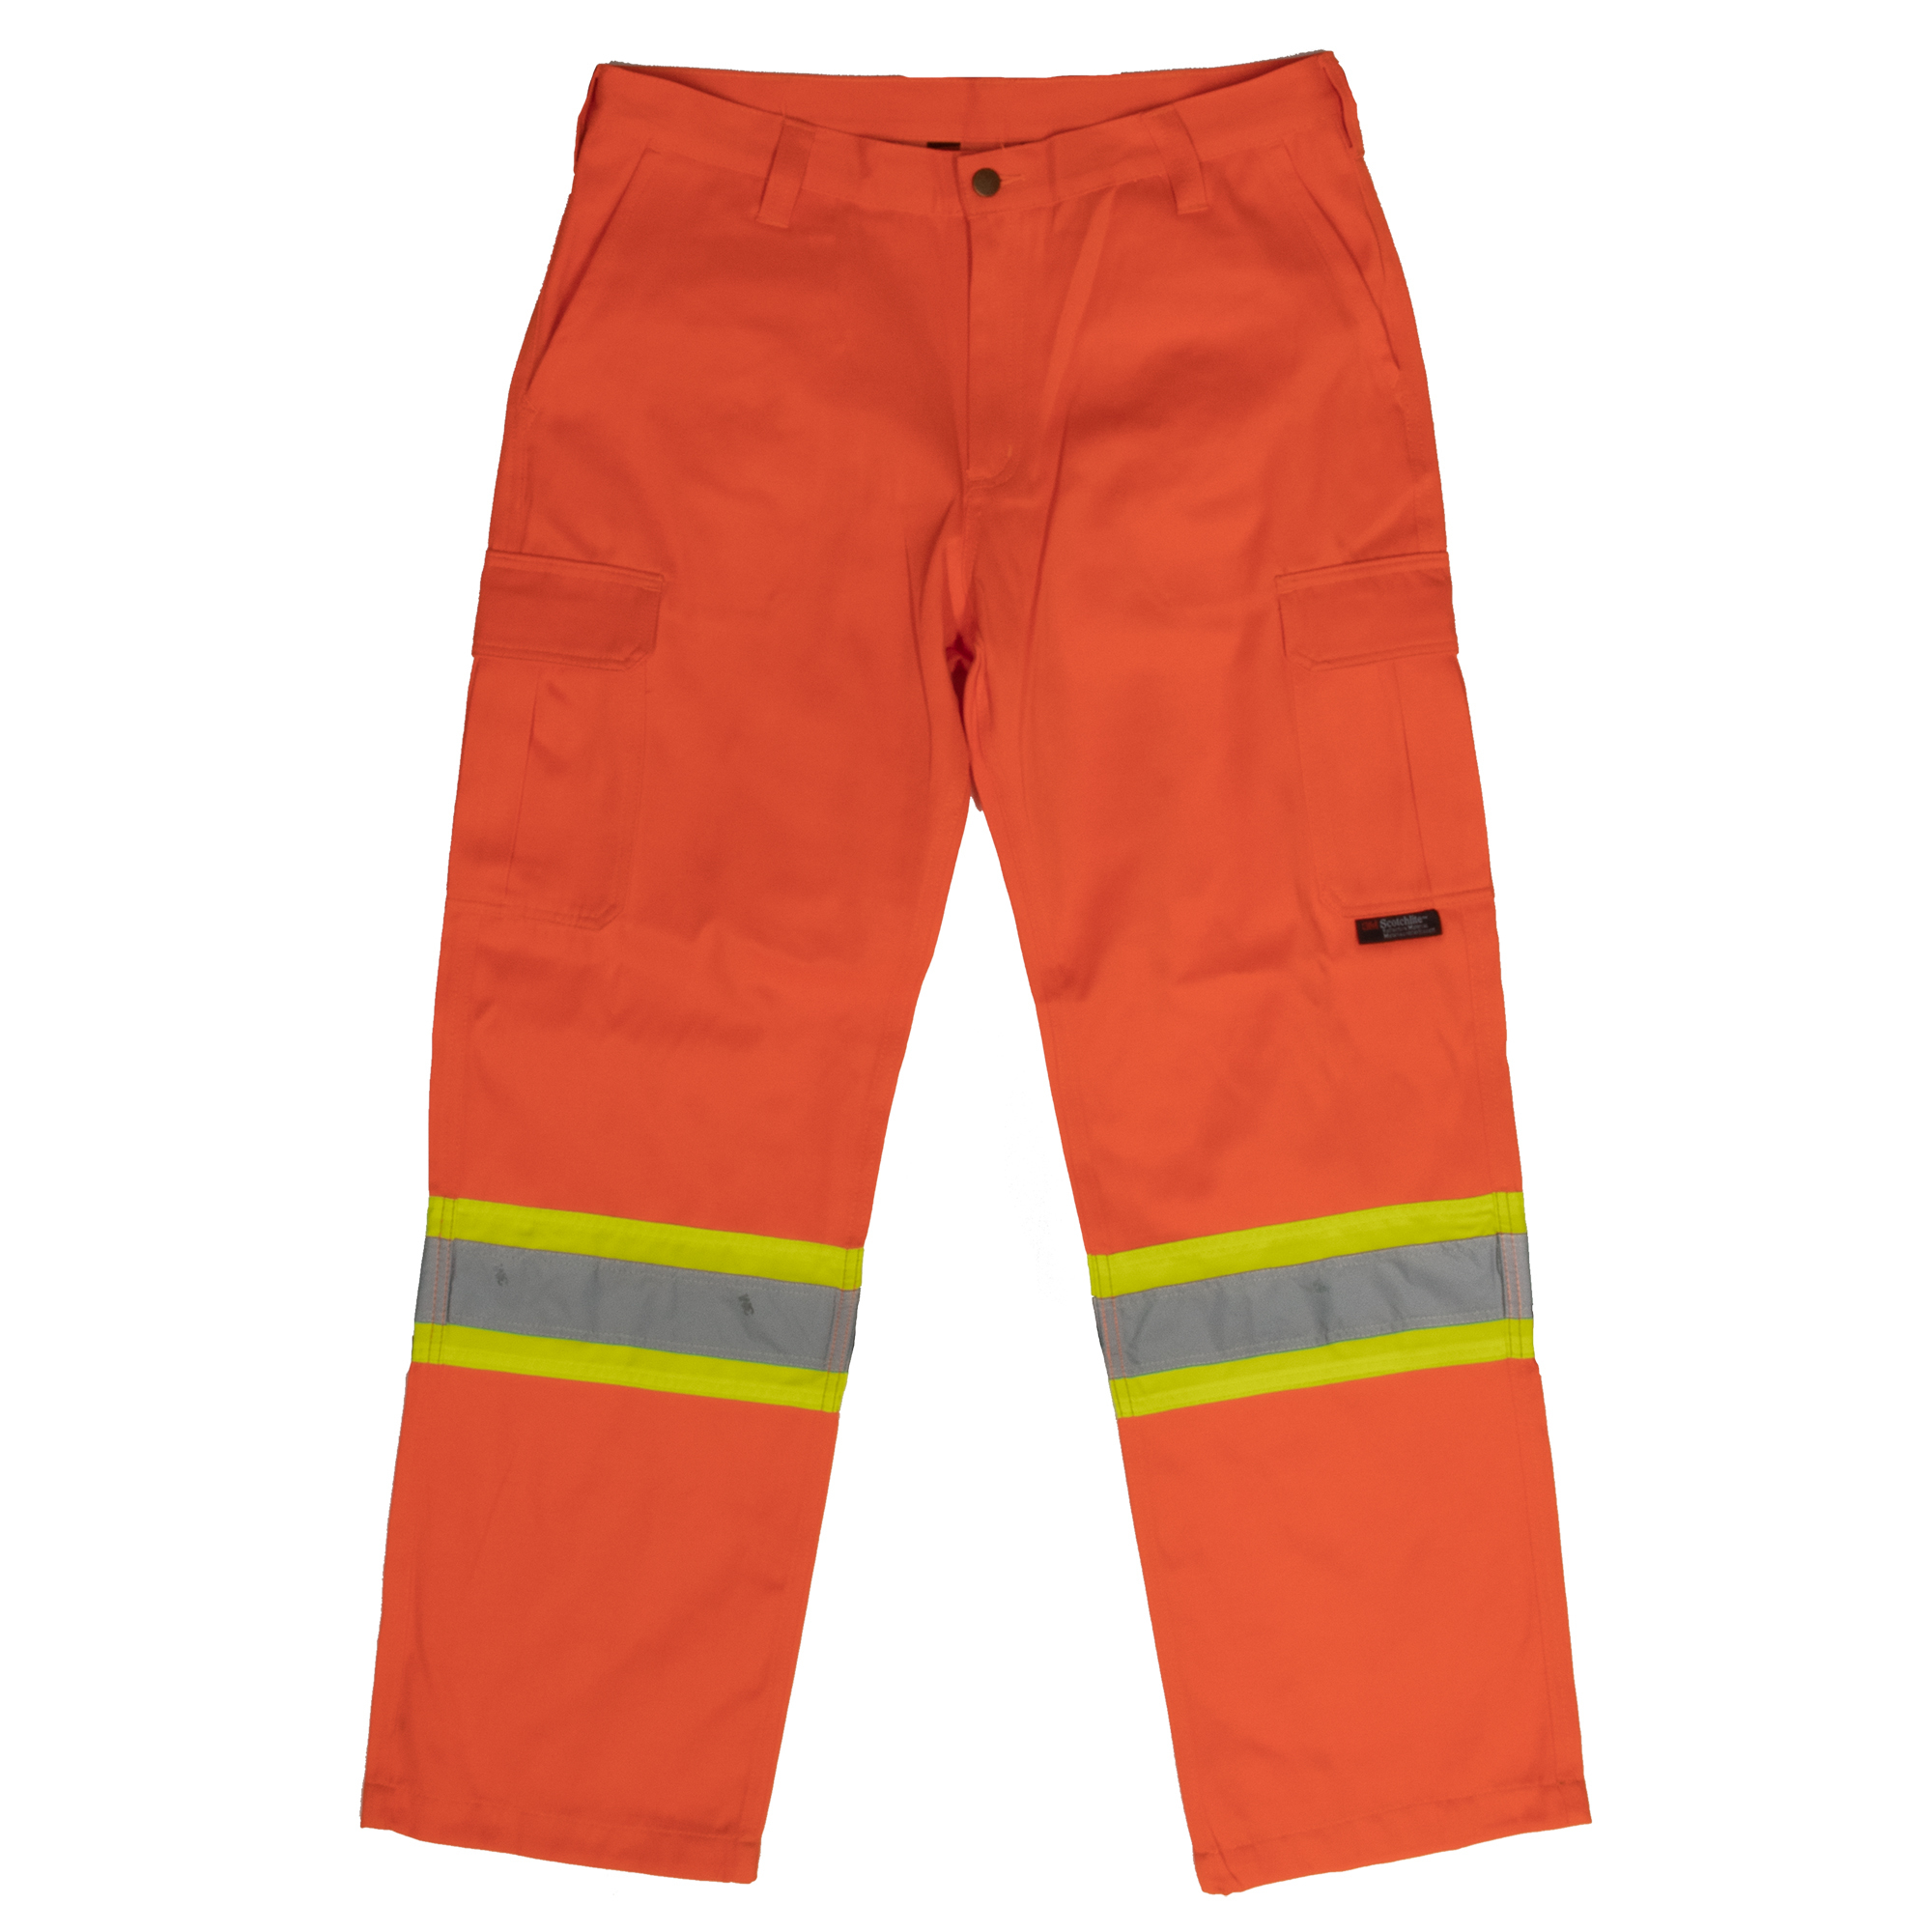 Tough Duck, Safety Cargo Work Pant, Waist 32 in, Inseam 30 in, Color Fluorescent Orange, Model SP010